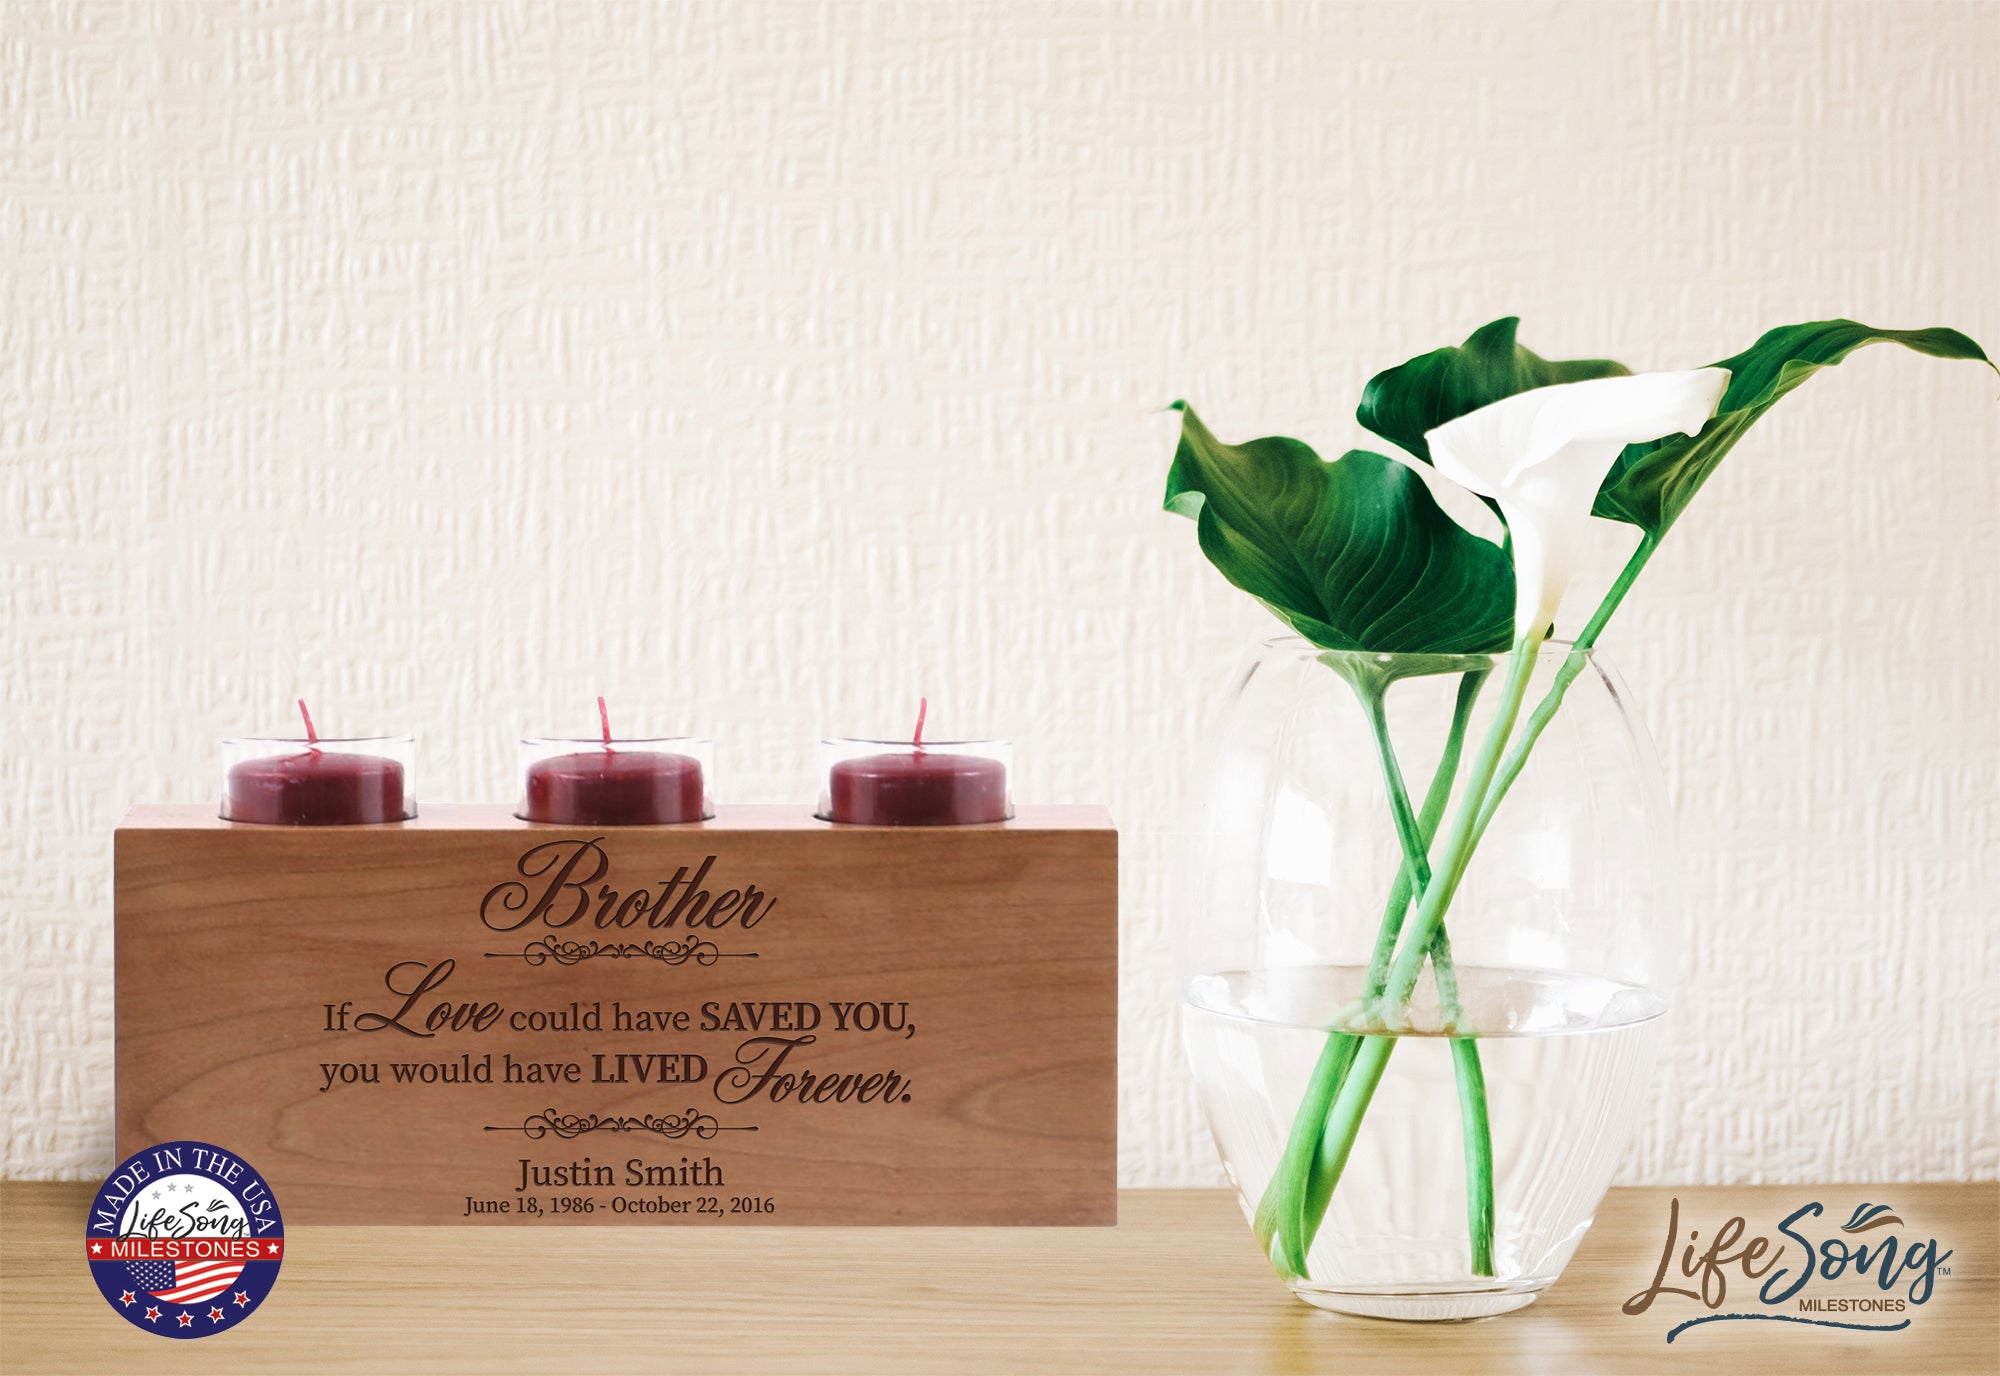 LifeSong Milestones Personalized Memorial Sympathy 3 Votive Candle Holder - Brother, If Love Could Engraved Tea Light Candle Loss of Loved One Gift - 10” x 4” x 4”.